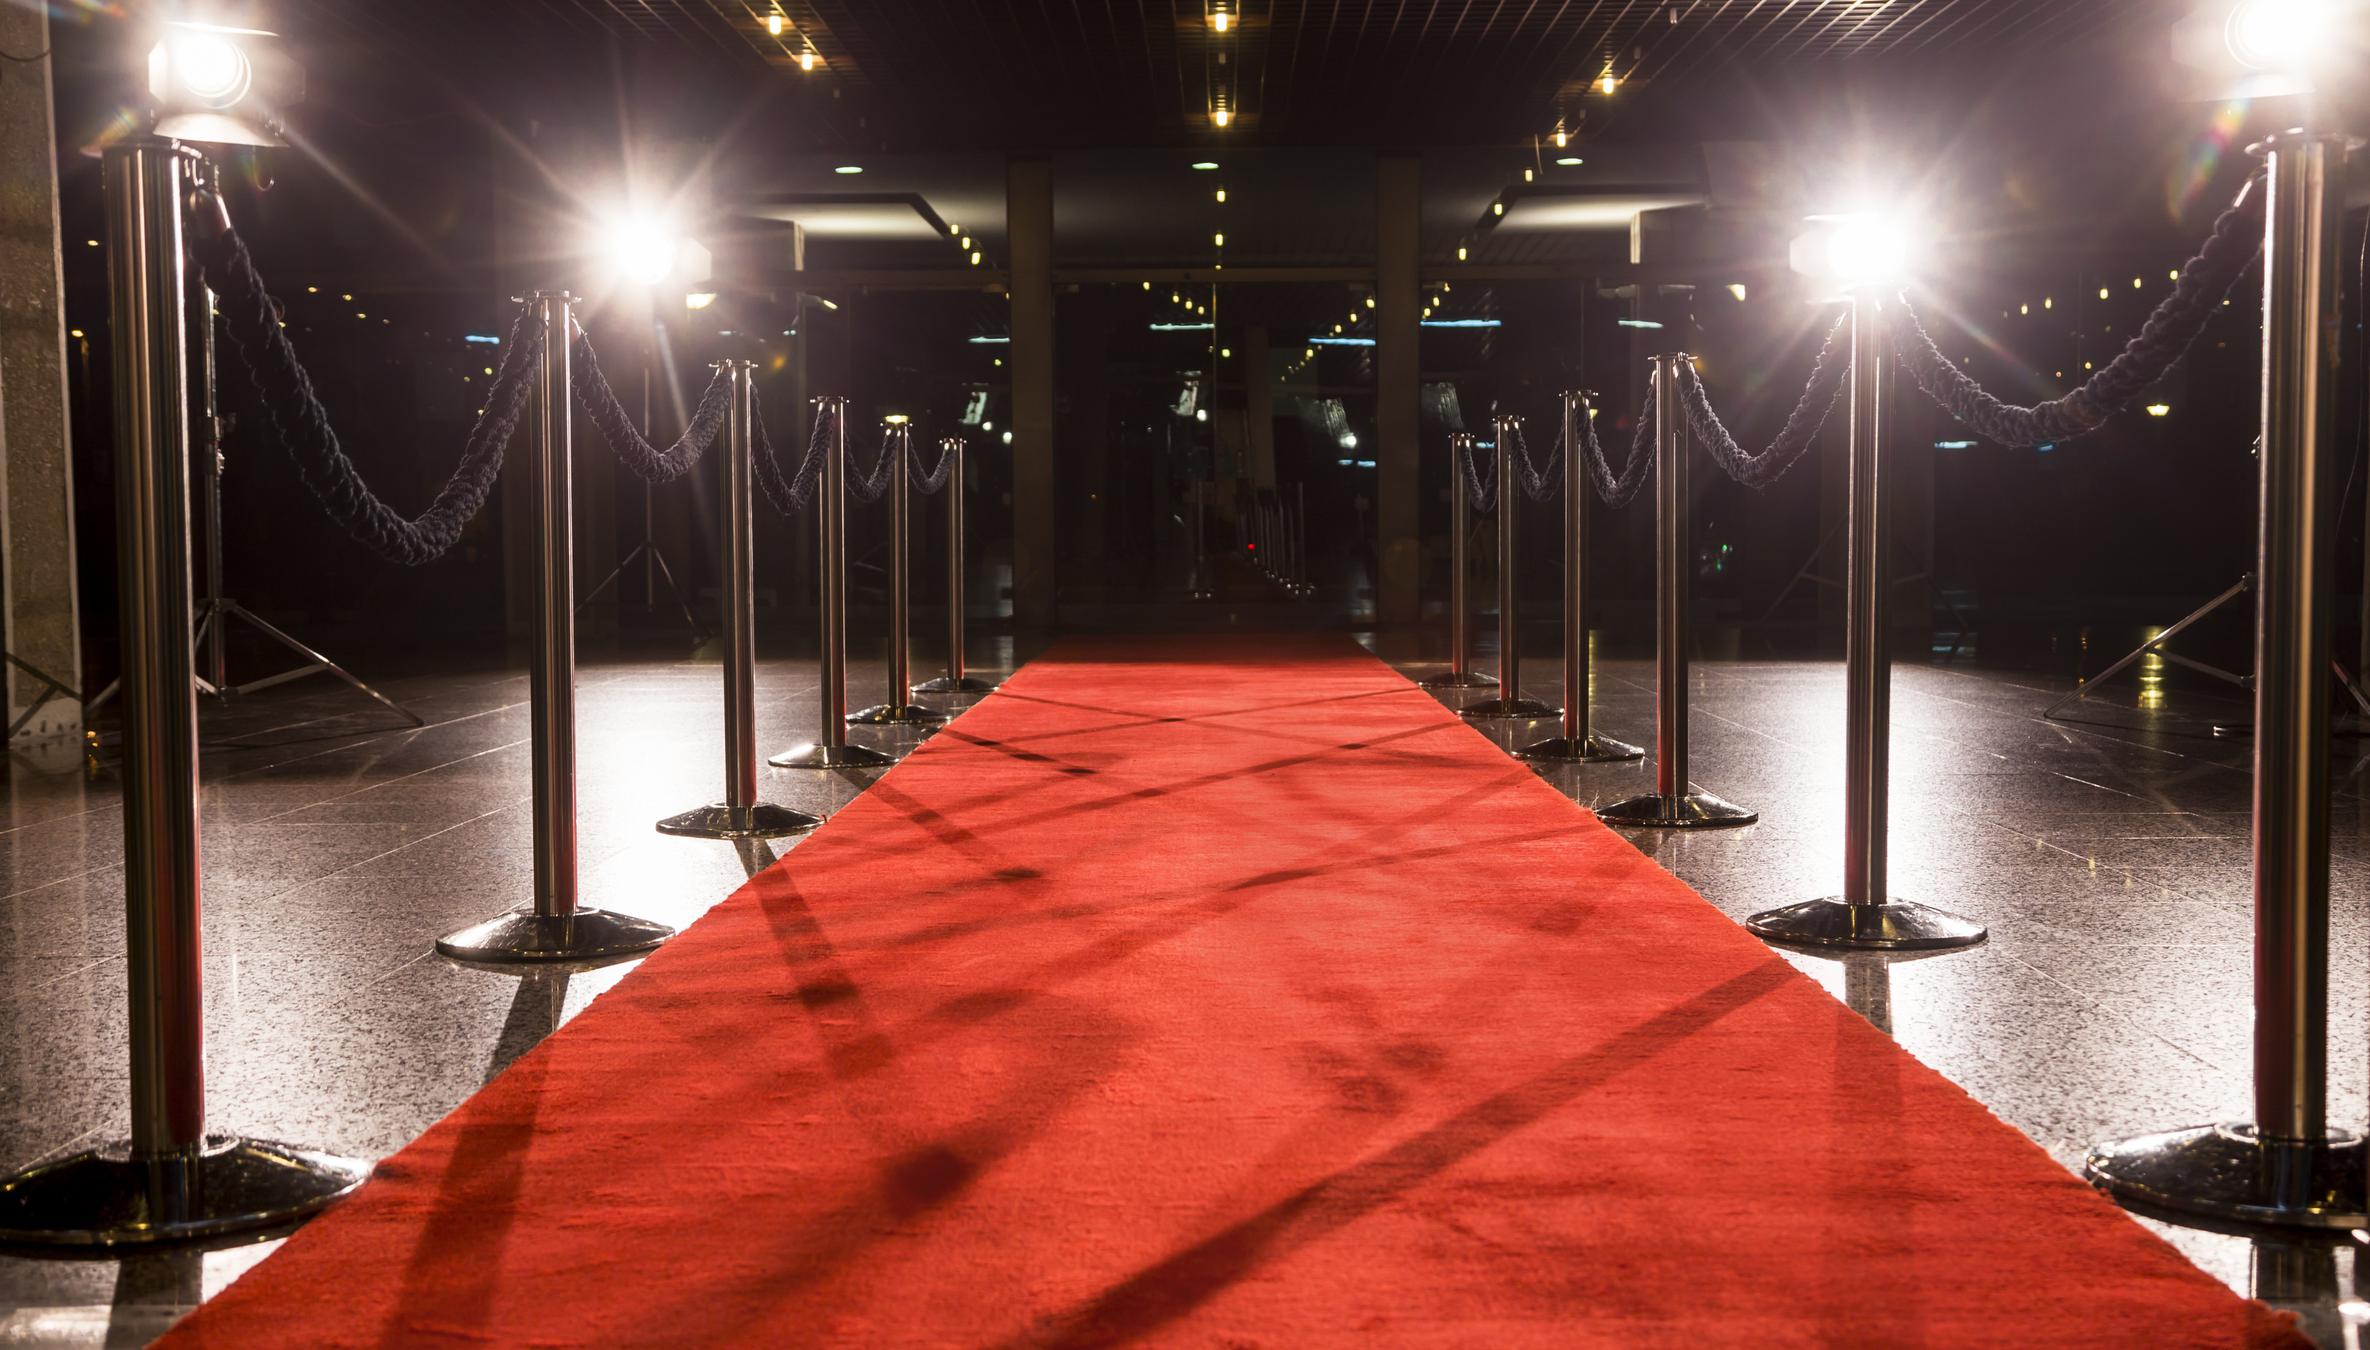 How to Walk the Red Carpet, According to a Publicist